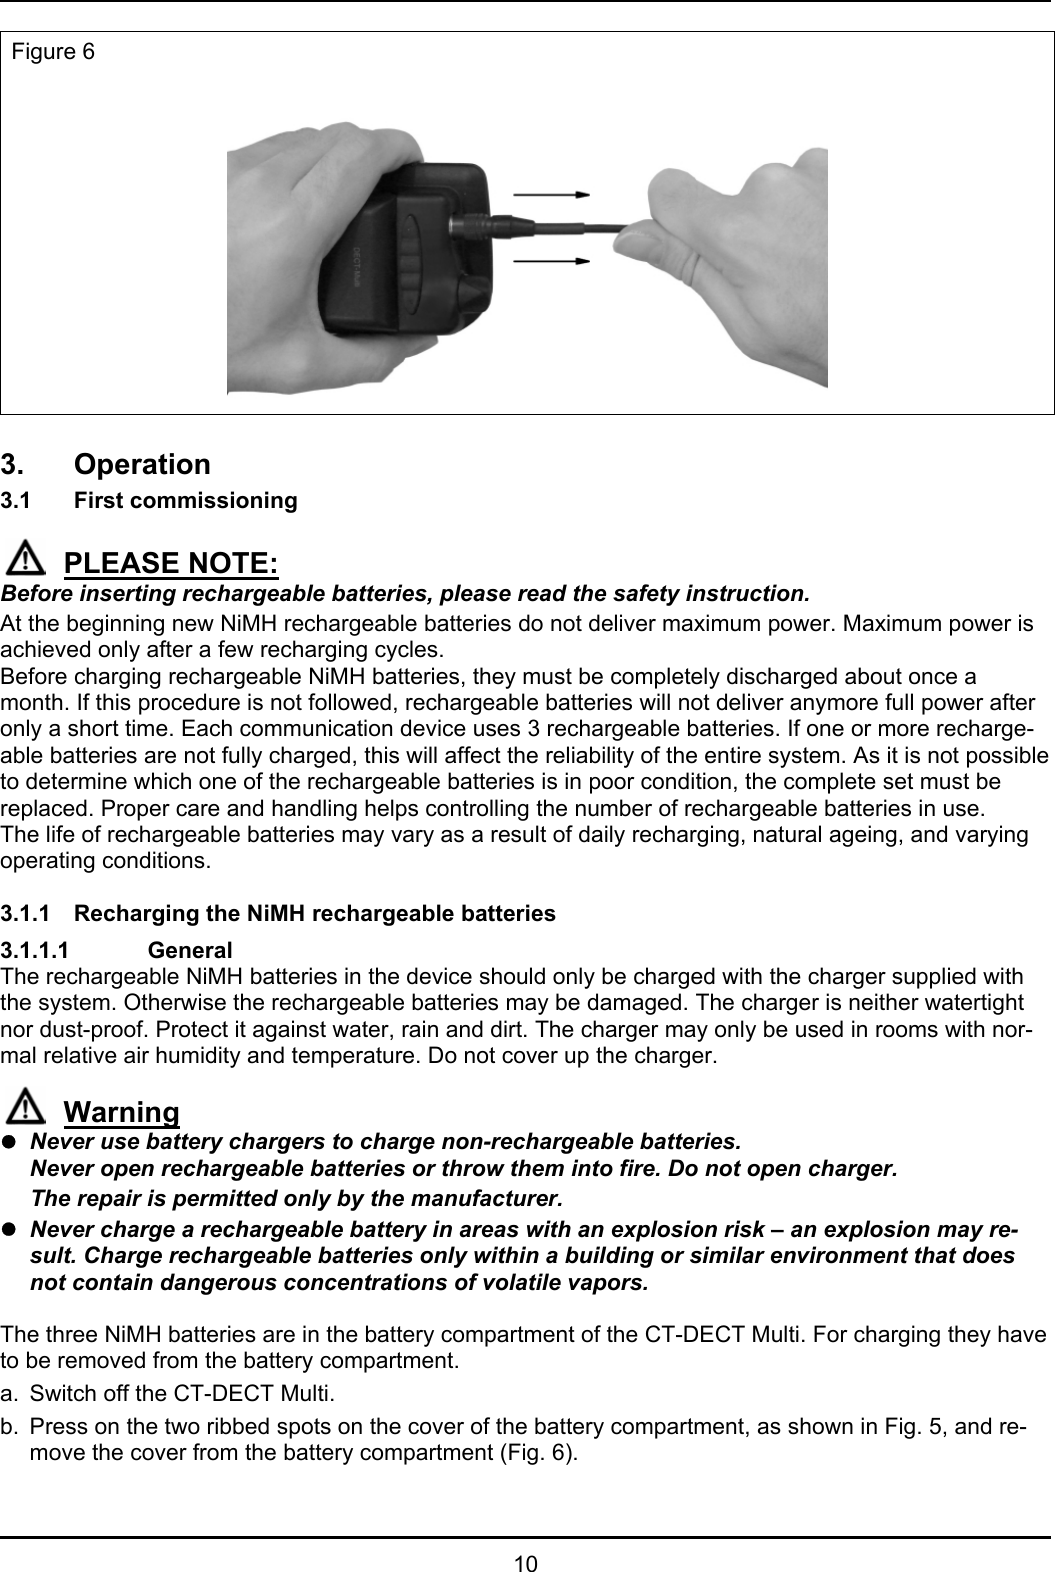   10 Figure 6   3. Operation  3.1 First commissioning  PLEASE NOTE: Before inserting rechargeable batteries, please read the safety instruction. At the beginning new NiMH rechargeable batteries do not deliver maximum power. Maximum power is achieved only after a few recharging cycles. Before charging rechargeable NiMH batteries, they must be completely discharged about once a month. If this procedure is not followed, rechargeable batteries will not deliver anymore full power after only a short time. Each communication device uses 3 rechargeable batteries. If one or more recharge-able batteries are not fully charged, this will affect the reliability of the entire system. As it is not possible to determine which one of the rechargeable batteries is in poor condition, the complete set must be replaced. Proper care and handling helps controlling the number of rechargeable batteries in use.  The life of rechargeable batteries may vary as a result of daily recharging, natural ageing, and varying operating conditions.  3.1.1  Recharging the NiMH rechargeable batteries  3.1.1.1   General The rechargeable NiMH batteries in the device should only be charged with the charger supplied with the system. Otherwise the rechargeable batteries may be damaged. The charger is neither watertight nor dust-proof. Protect it against water, rain and dirt. The charger may only be used in rooms with nor-mal relative air humidity and temperature. Do not cover up the charger.  Warning z Never use battery chargers to charge non-rechargeable batteries.  Never open rechargeable batteries or throw them into fire. Do not open charger.    The repair is permitted only by the manufacturer. z Never charge a rechargeable battery in areas with an explosion risk – an explosion may re-sult. Charge rechargeable batteries only within a building or similar environment that does not contain dangerous concentrations of volatile vapors.  The three NiMH batteries are in the battery compartment of the CT-DECT Multi. For charging they have to be removed from the battery compartment. a.  Switch off the CT-DECT Multi. b.  Press on the two ribbed spots on the cover of the battery compartment, as shown in Fig. 5, and re-move the cover from the battery compartment (Fig. 6). 